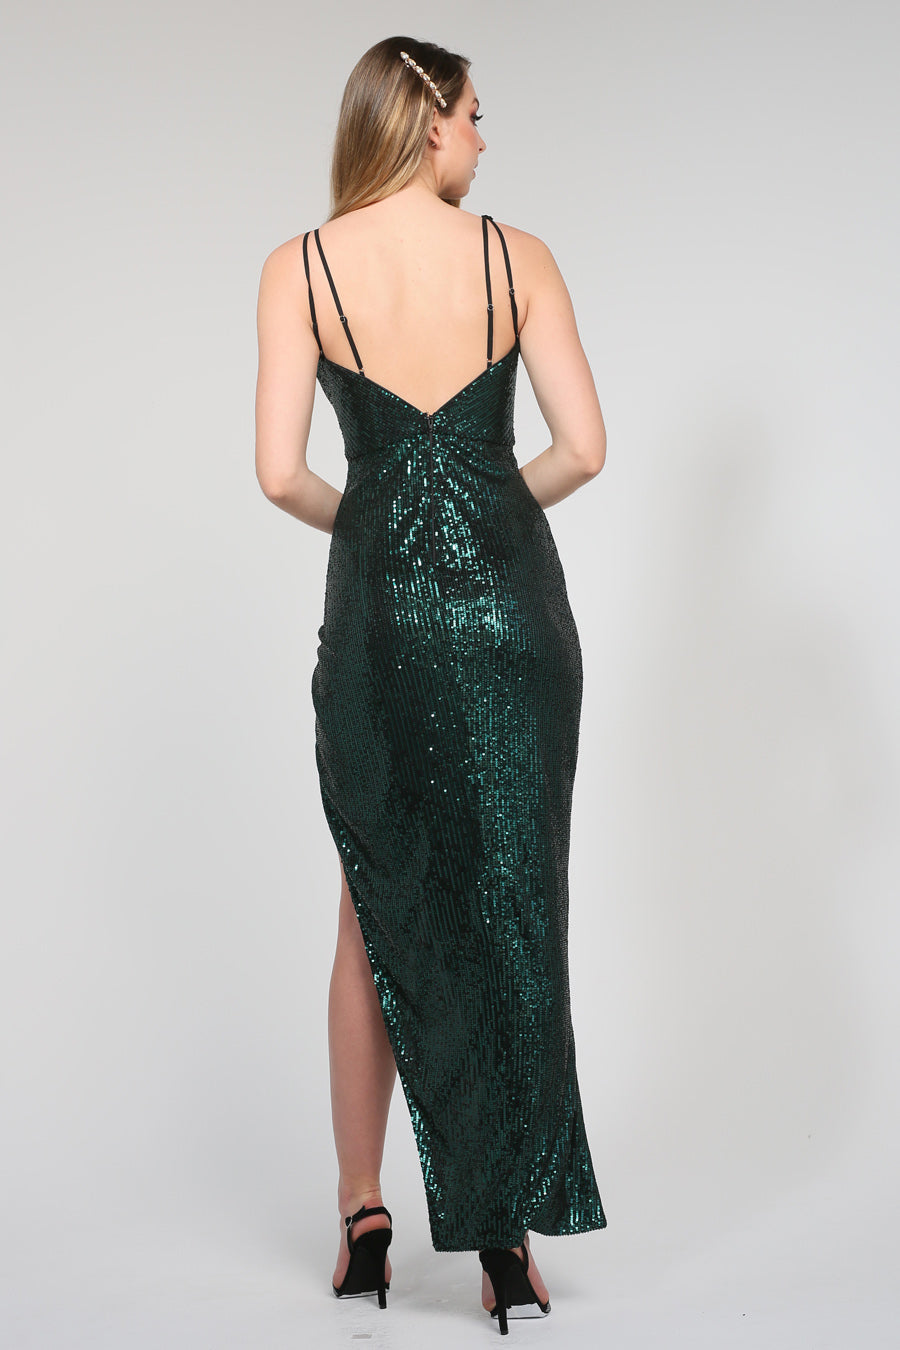 Tina Holly Couture TA007 Emerald Green Sequin Midi Cocktail Dress Tina Holly Couture$ AfterPay Humm ZipPay LayBuy Sezzle